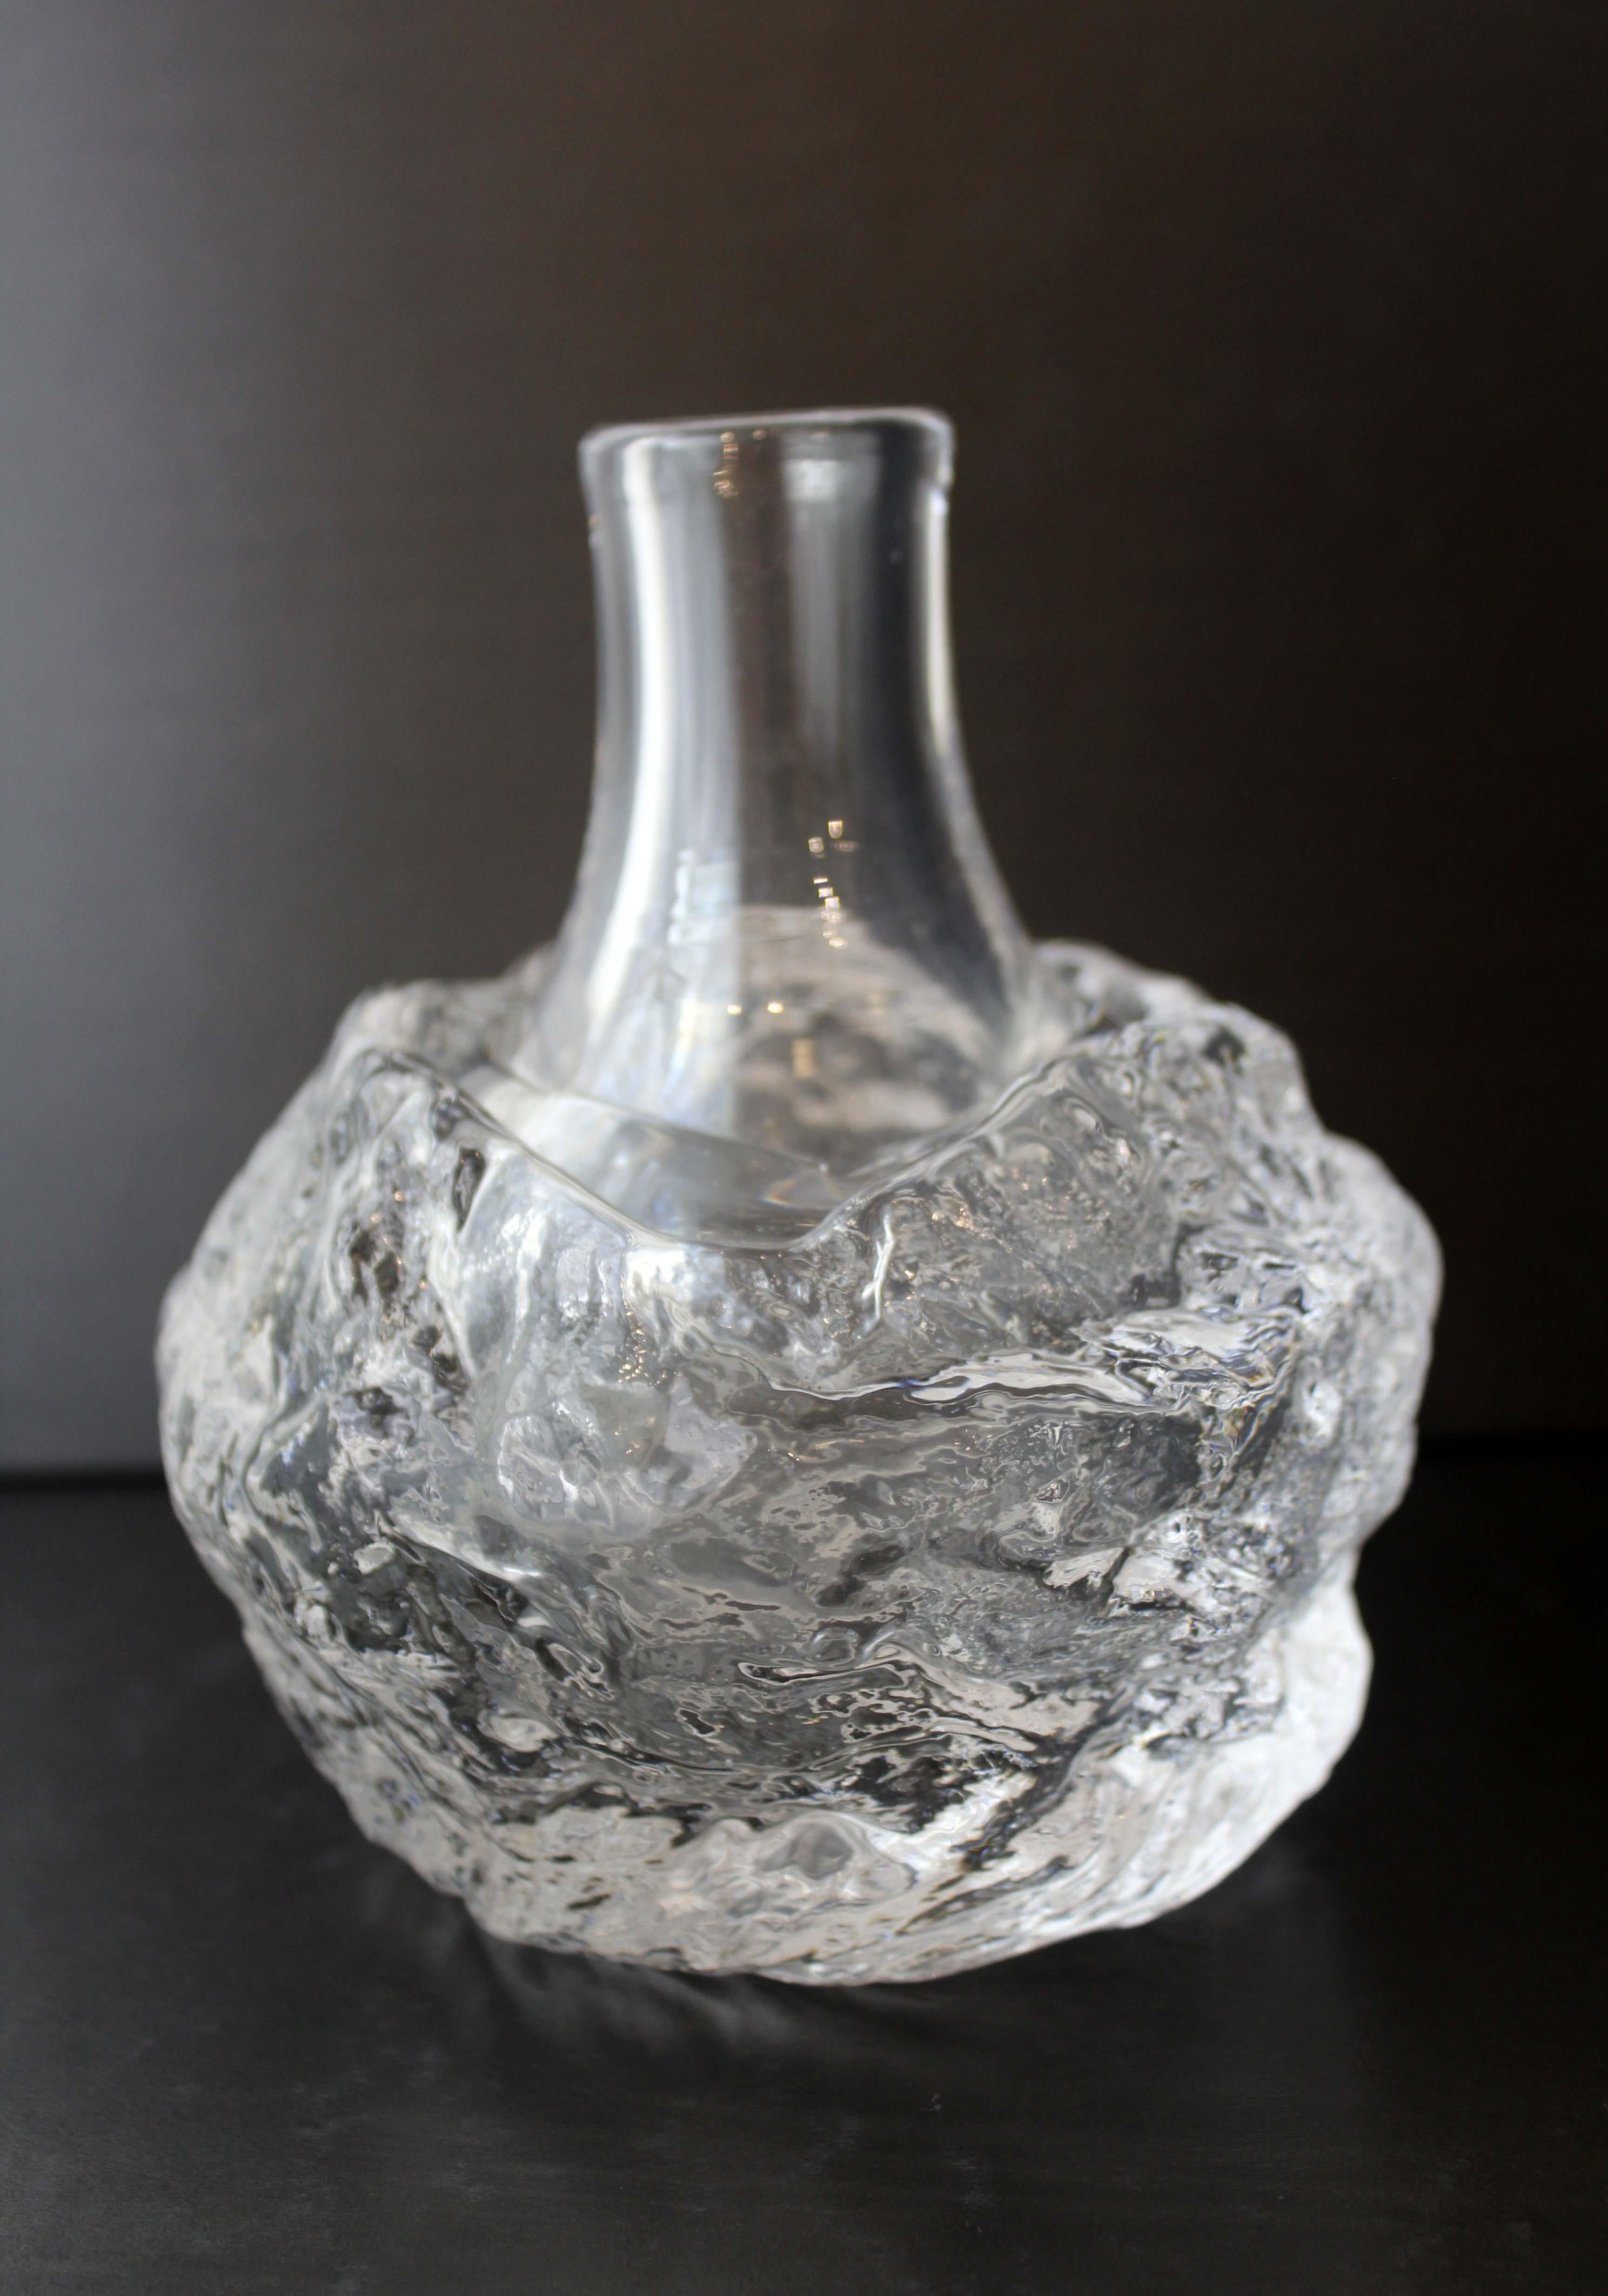 Waarf Rare Kosta Glass Vessel Clear Glass Overlay In Good Condition For Sale In Keego Harbor, MI